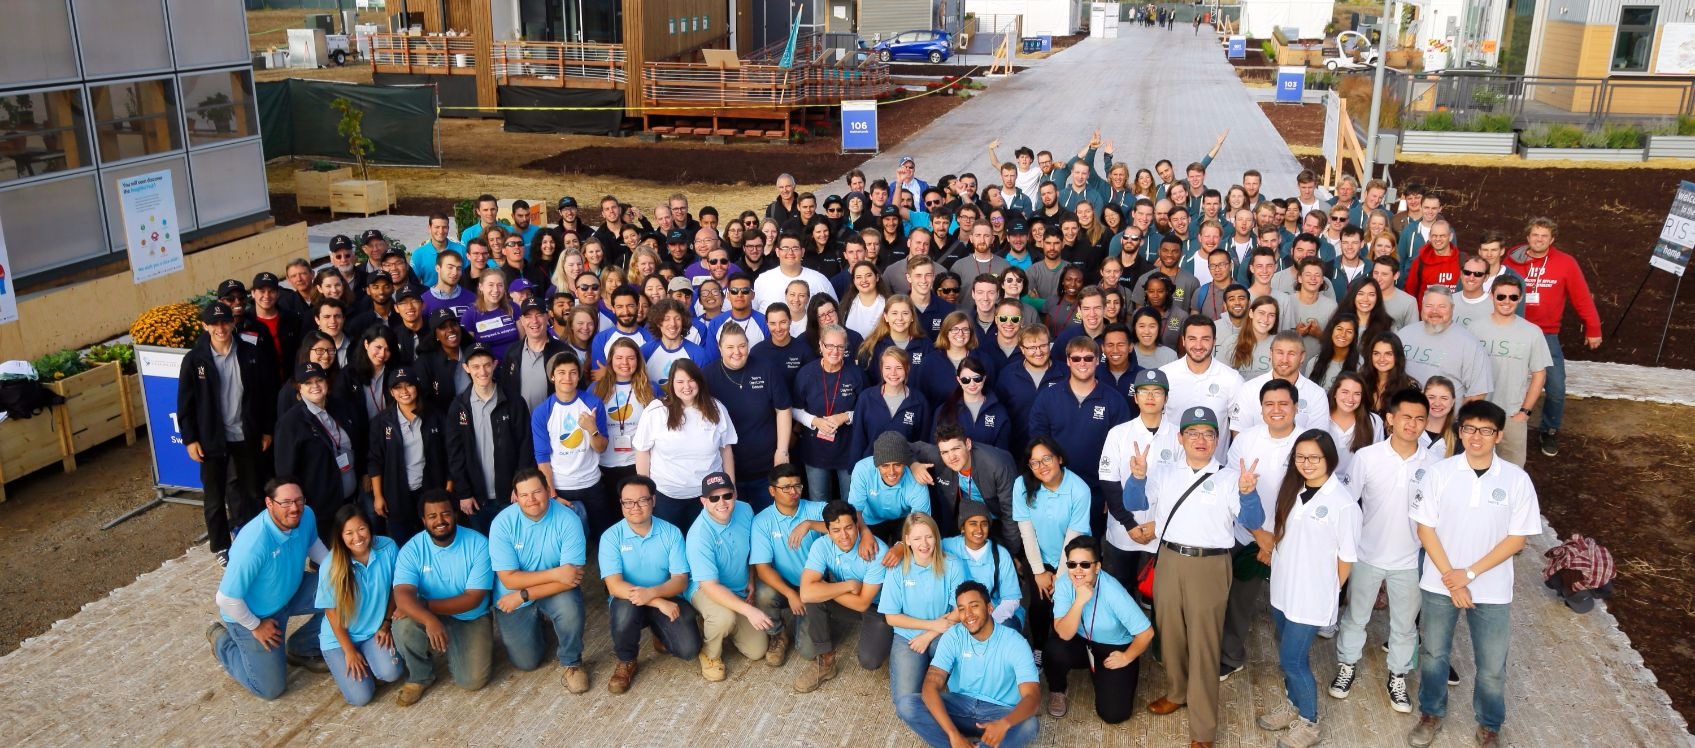 Photo of a large group of young men and women, all members of the teams of the U.S. Department of Energy Solar Decathlon 2017, standing on a temporary walkway between rows of full-sized solar powered houses.